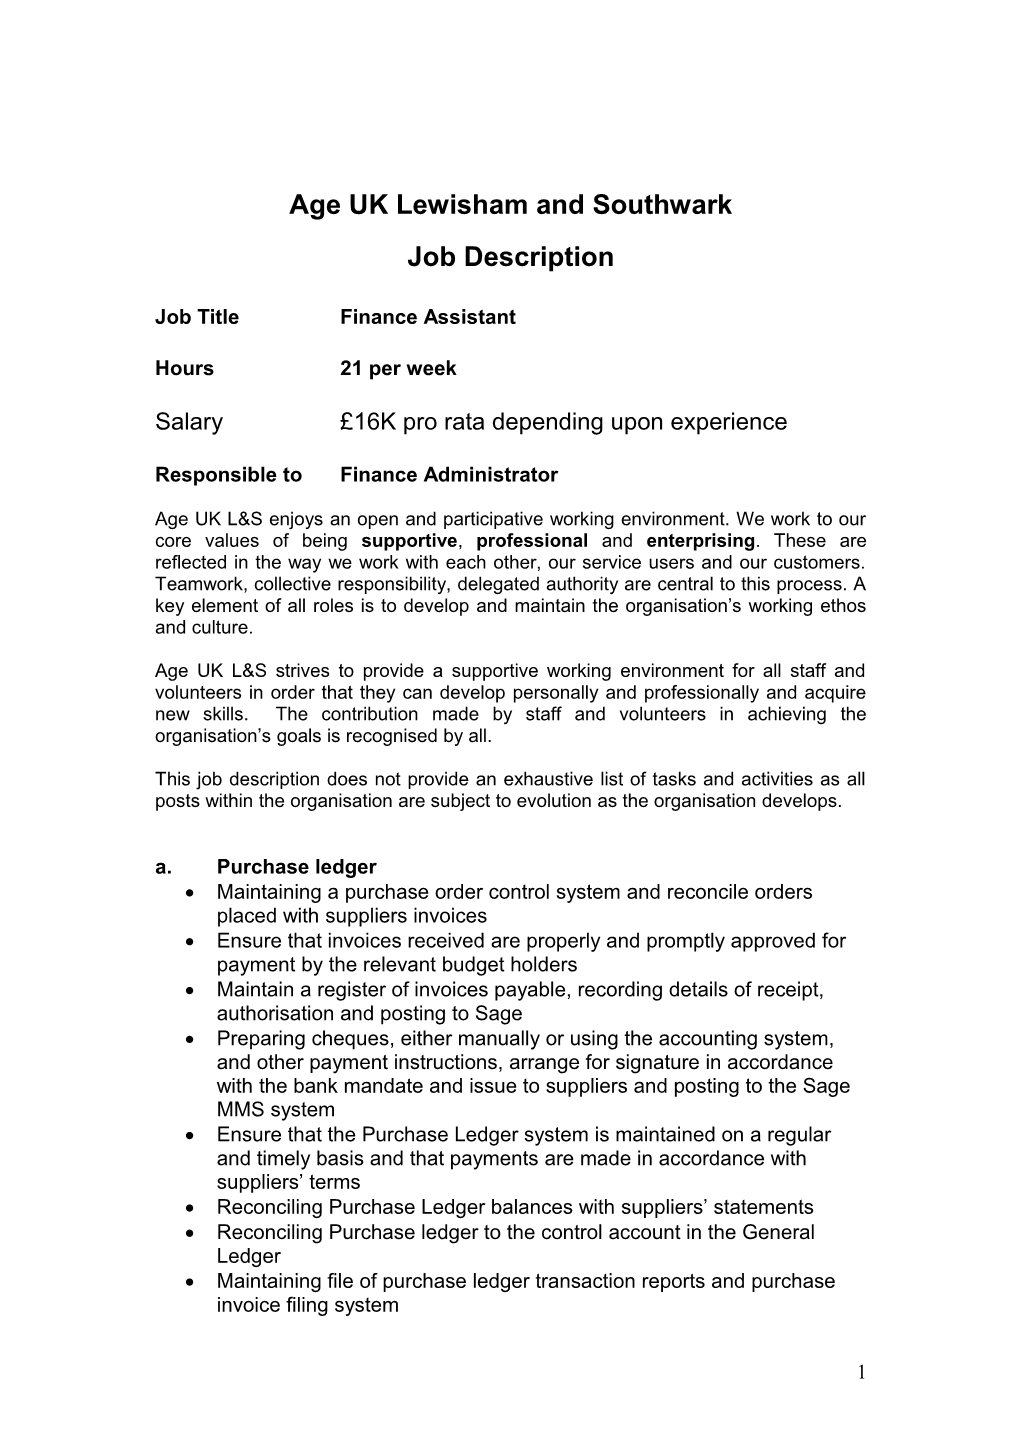 Job Specification for Administration Role